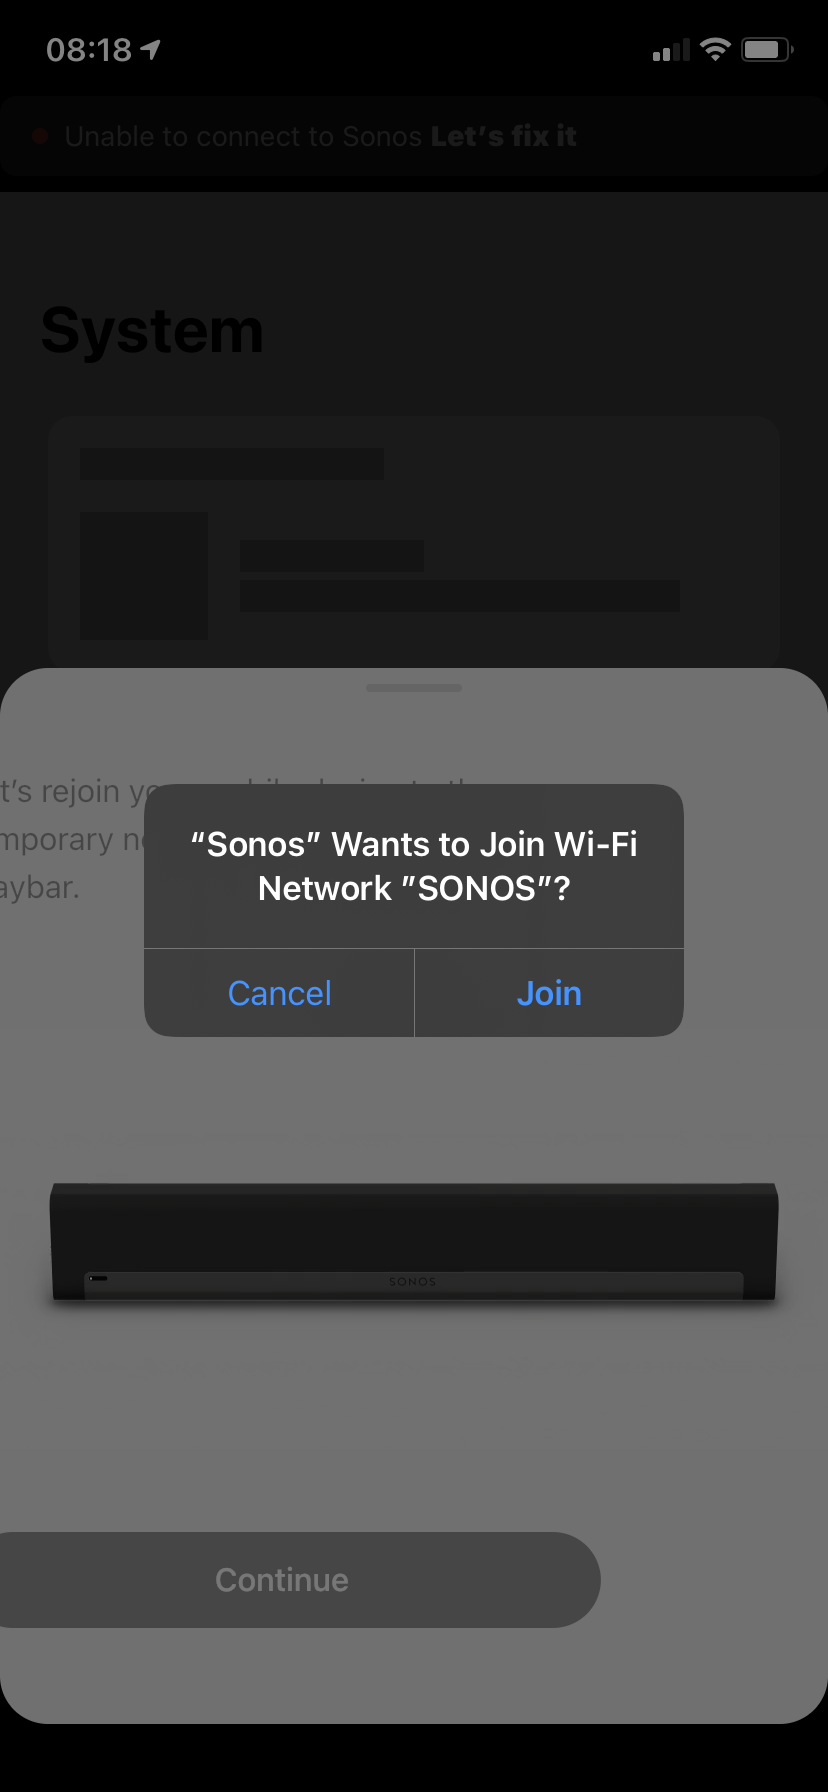 the network "SONOS" after changing on S2 App | Sonos Community